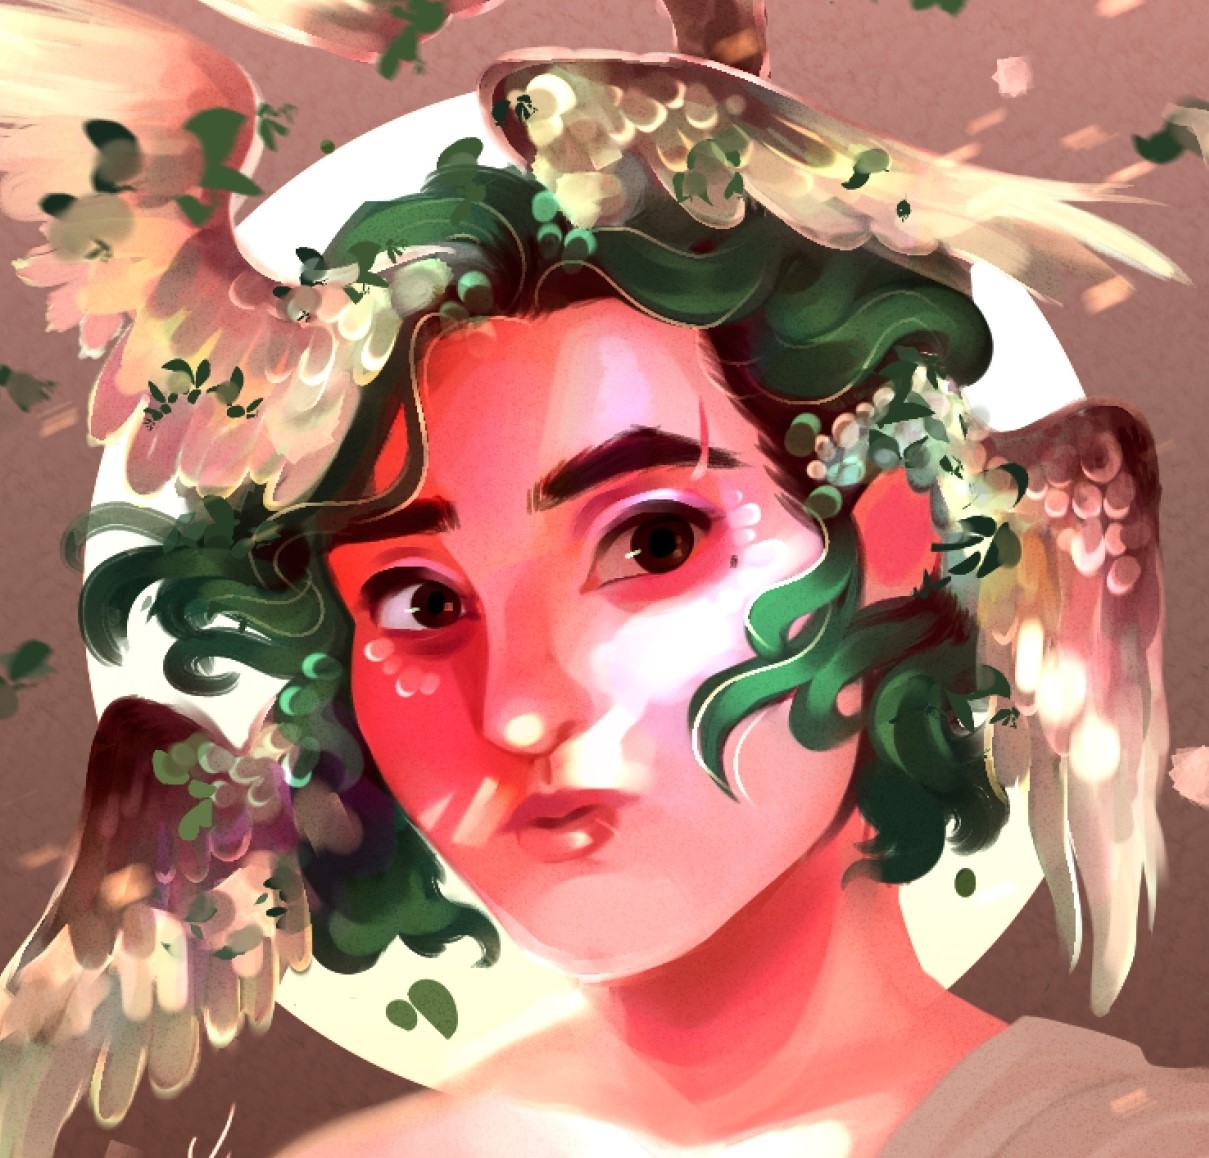 An illustration of Aire with green hair, wings sprouting from their head with a halo behind. 